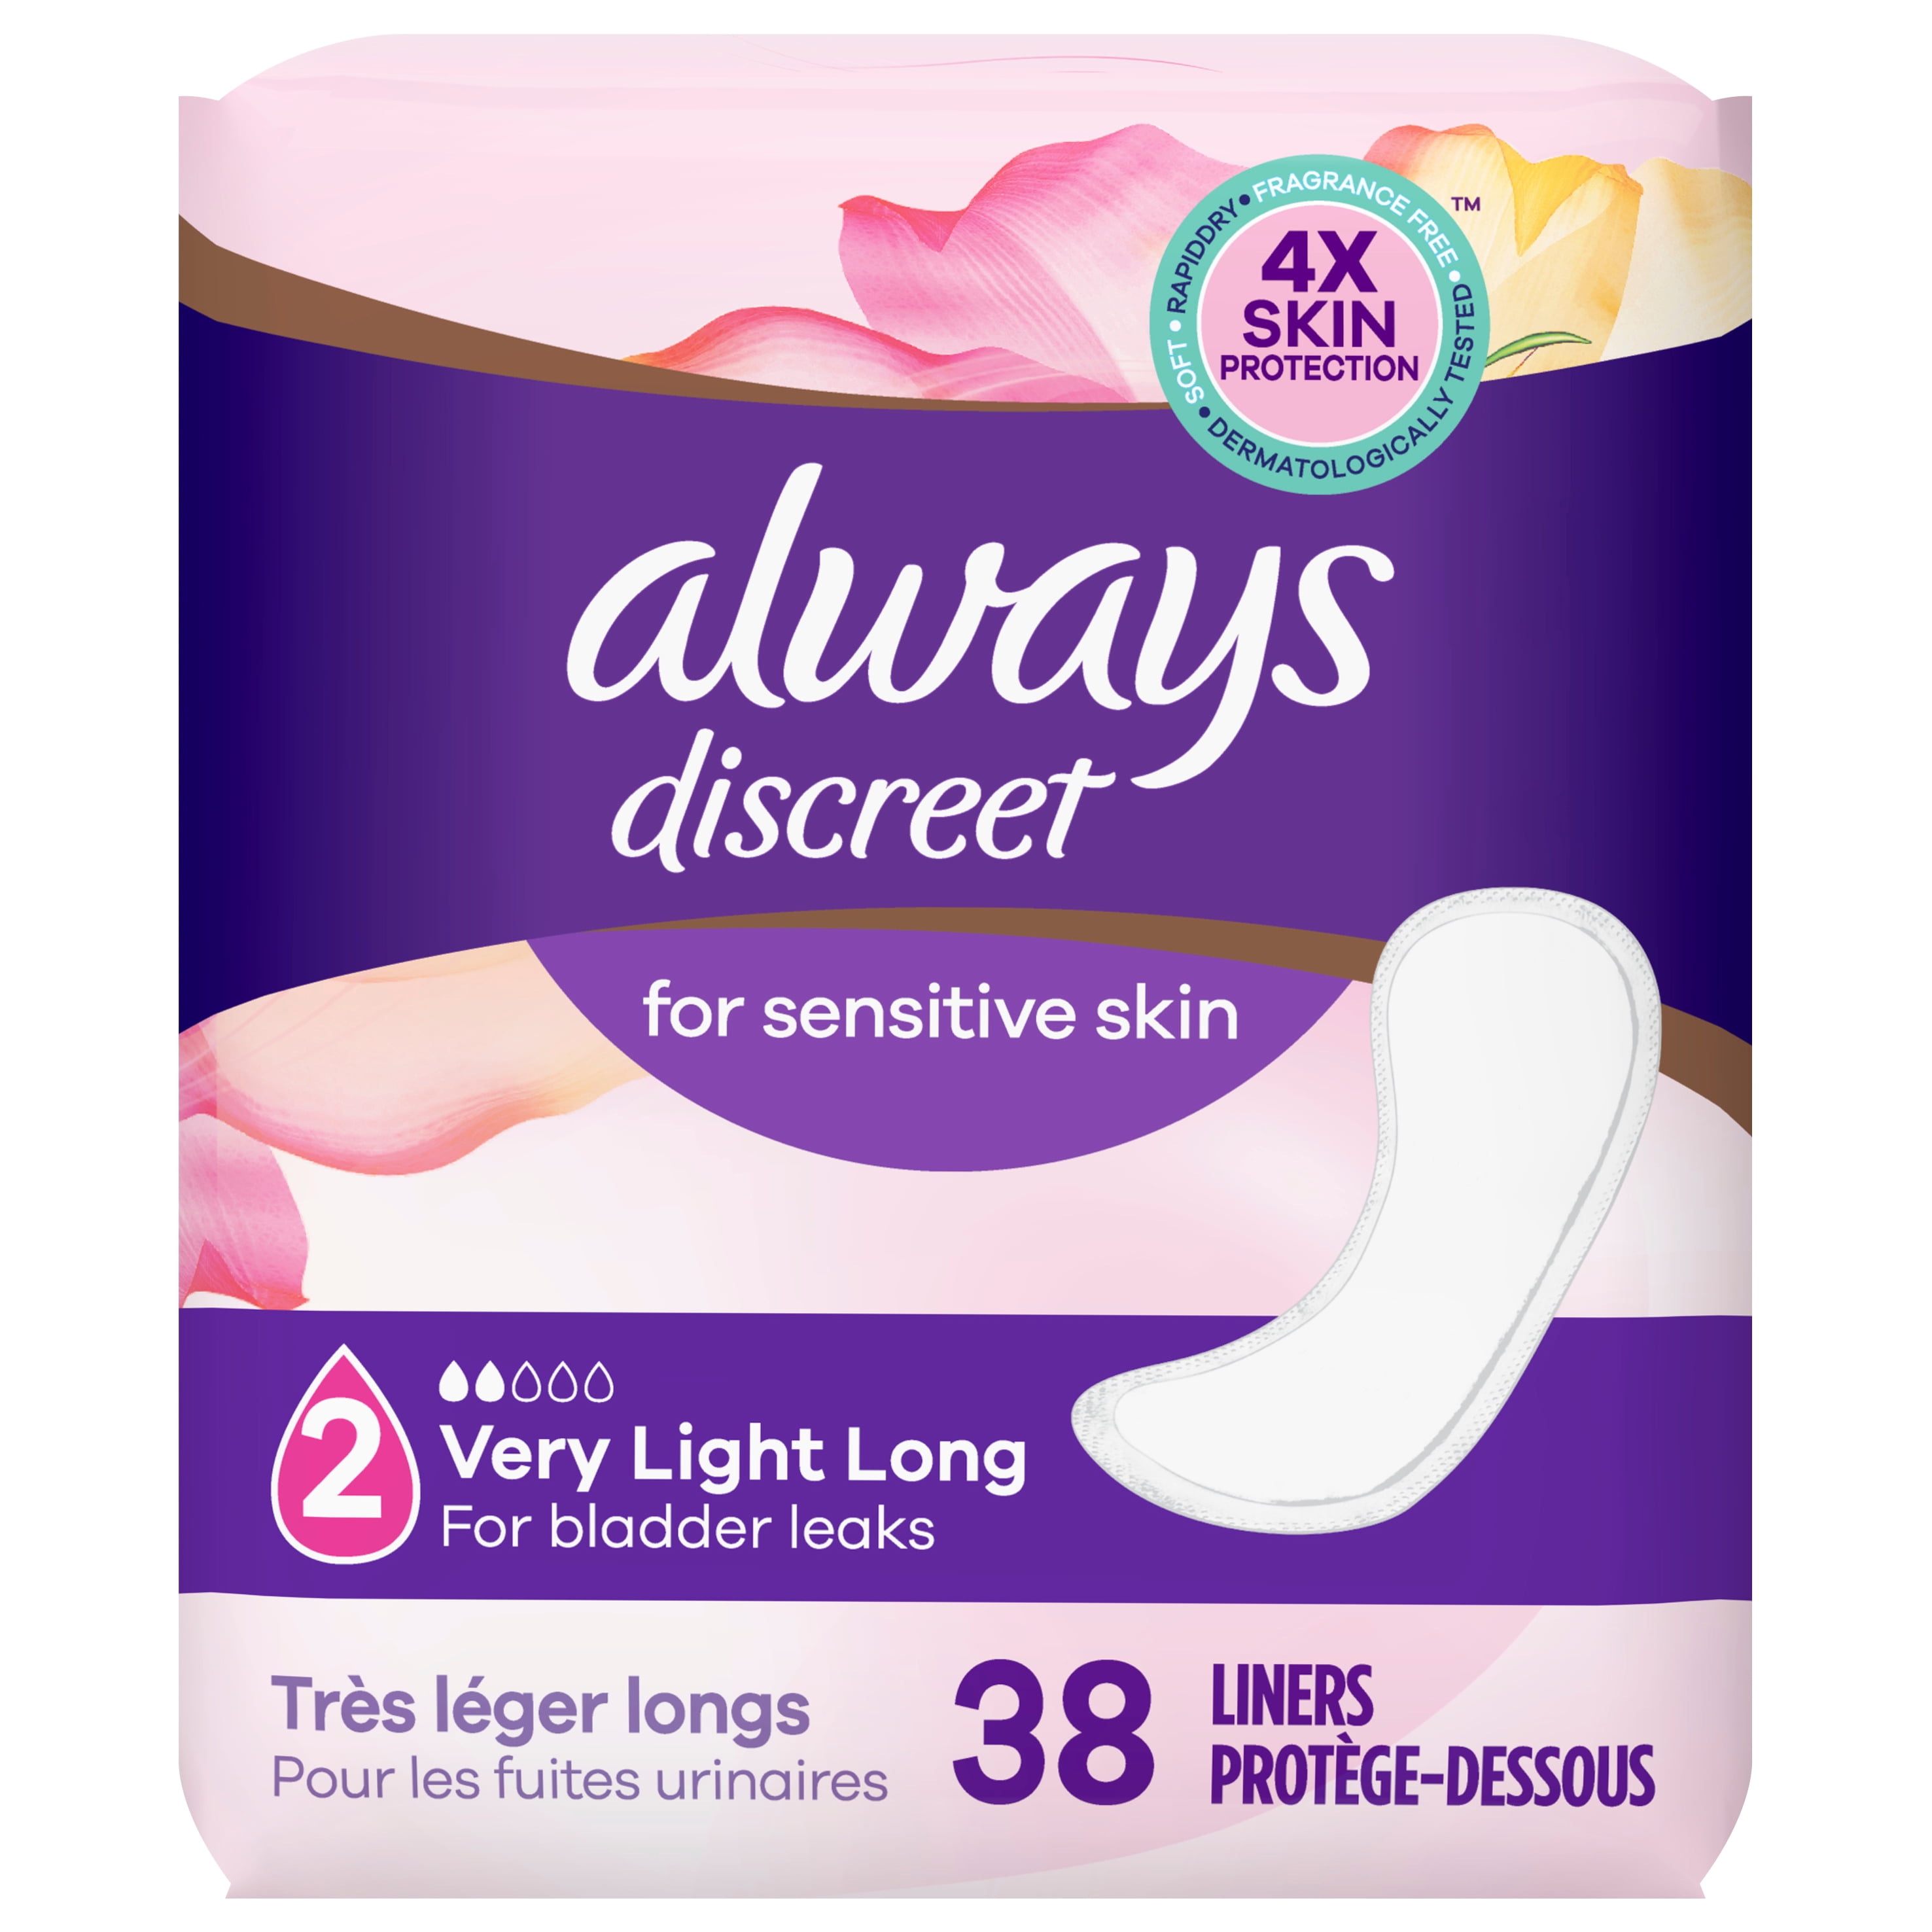 Always Ultra Thin Pads with Wings, Size 1, Regular Absorbency, 62 CT 